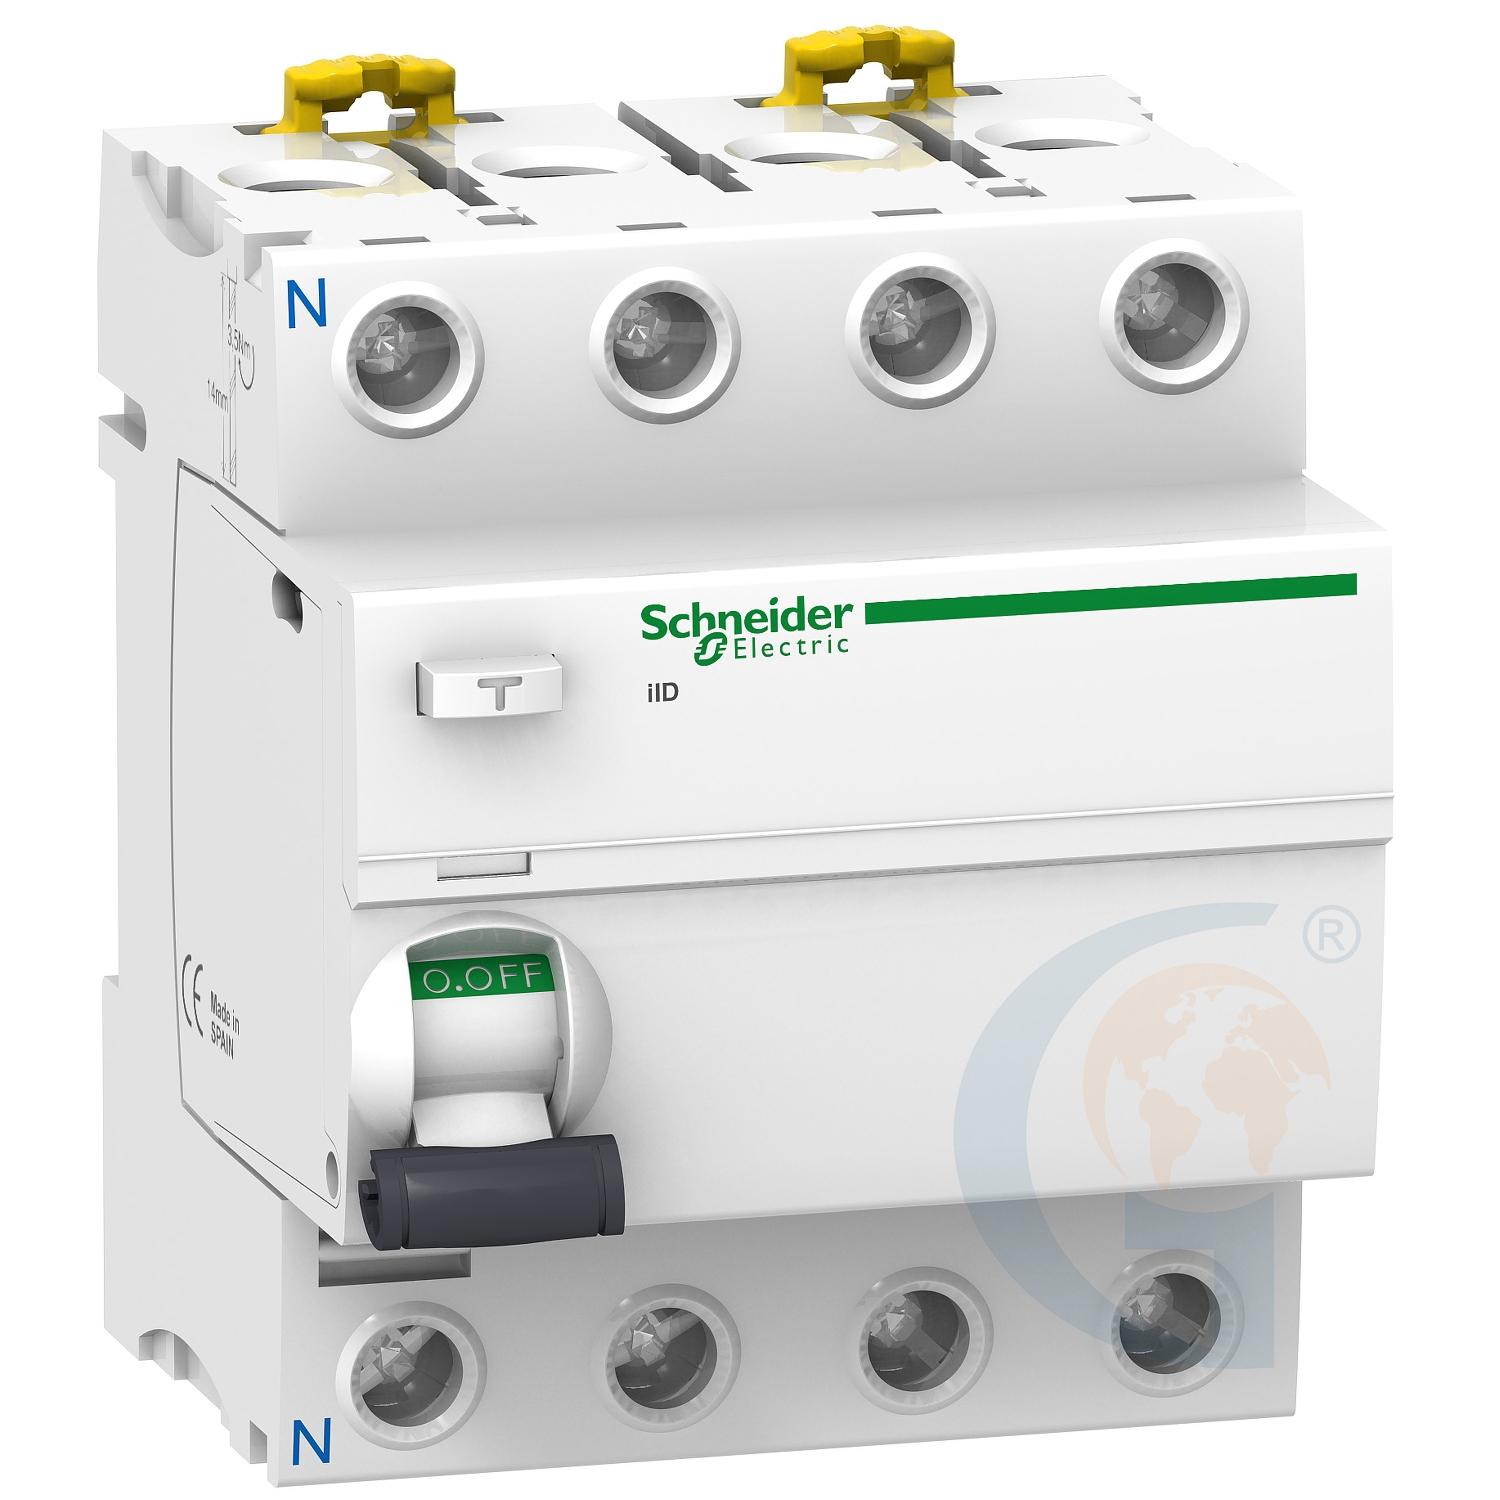 Schneider Electric A9R17463 ACTI 9 IID – RCCB – 4P – 63A – 500MA S – TYPE AC https://gesrepair.com/wp-content/uploads/2020/Schneider/Schneider_Electric_A9R17463_.jpg